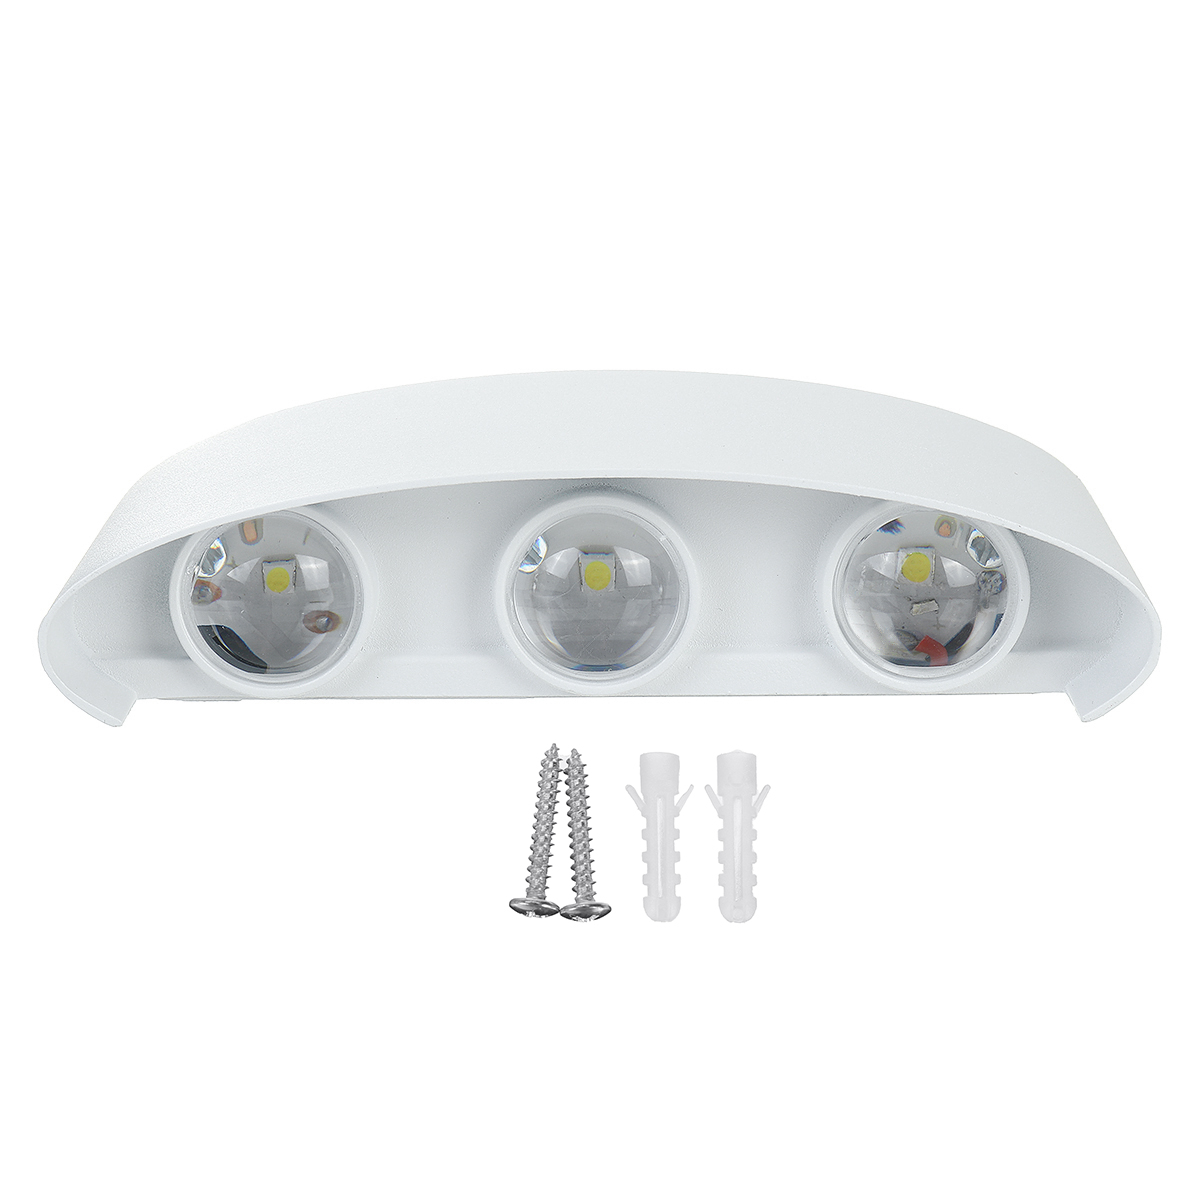 Find 2/4/6/8/10/12 Heads LED Wall Lamp Indoor Outdoor Waterproof Light Fixture Living Room Bedroom Stair Lamp for Sale on Gipsybee.com with cryptocurrencies